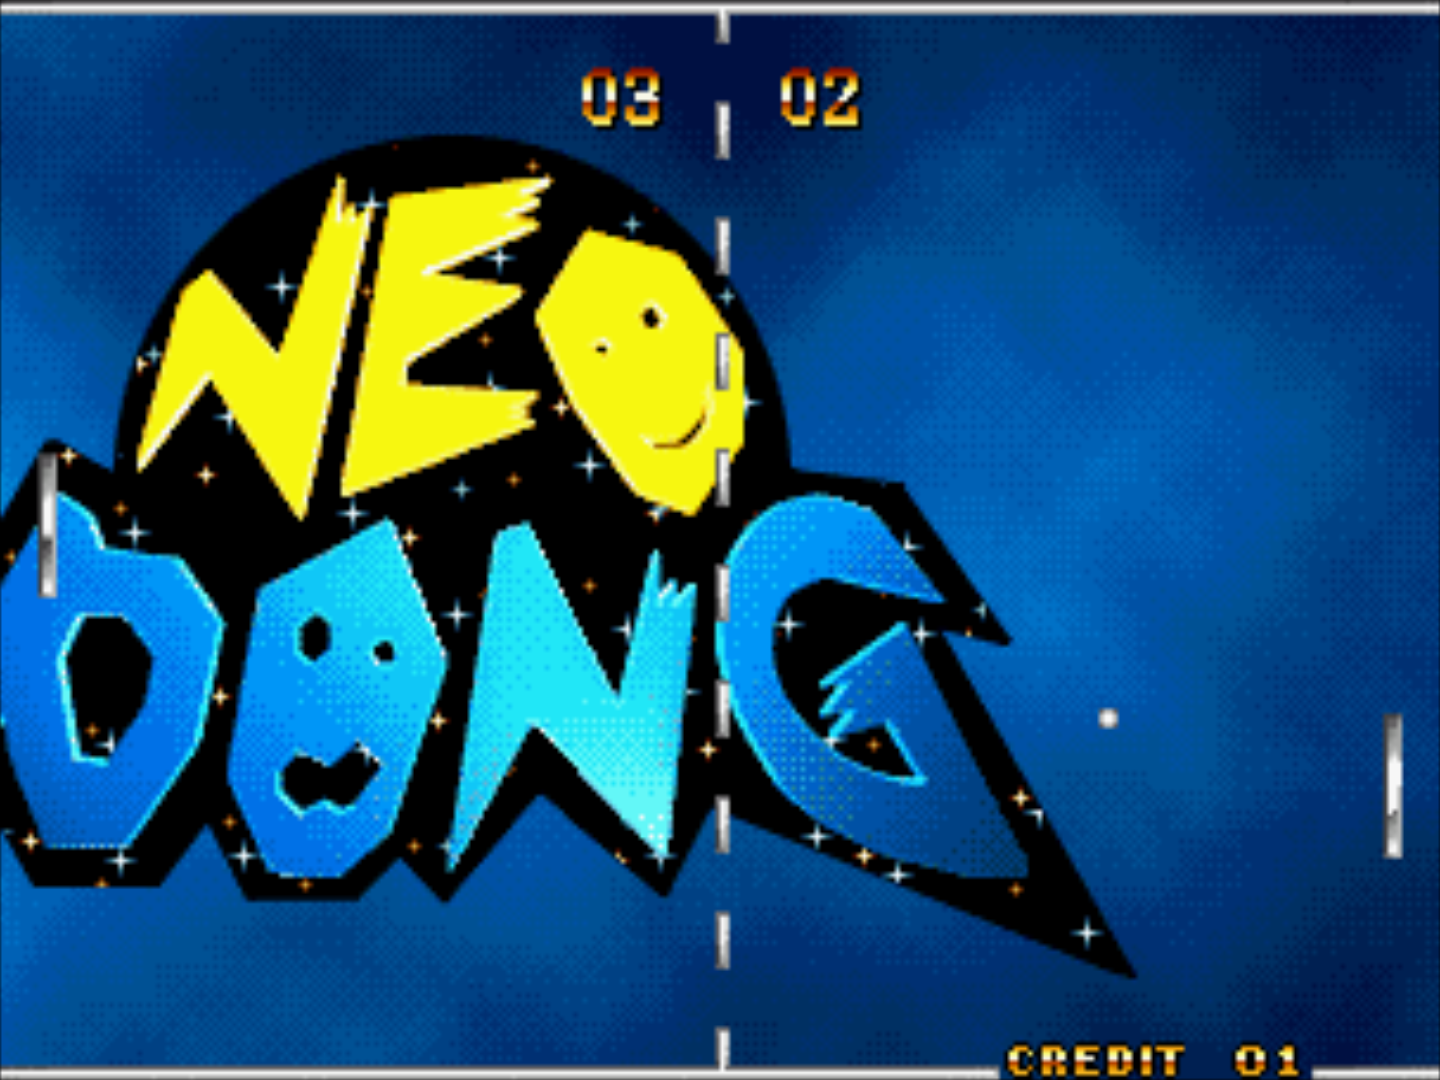 Neo Pong